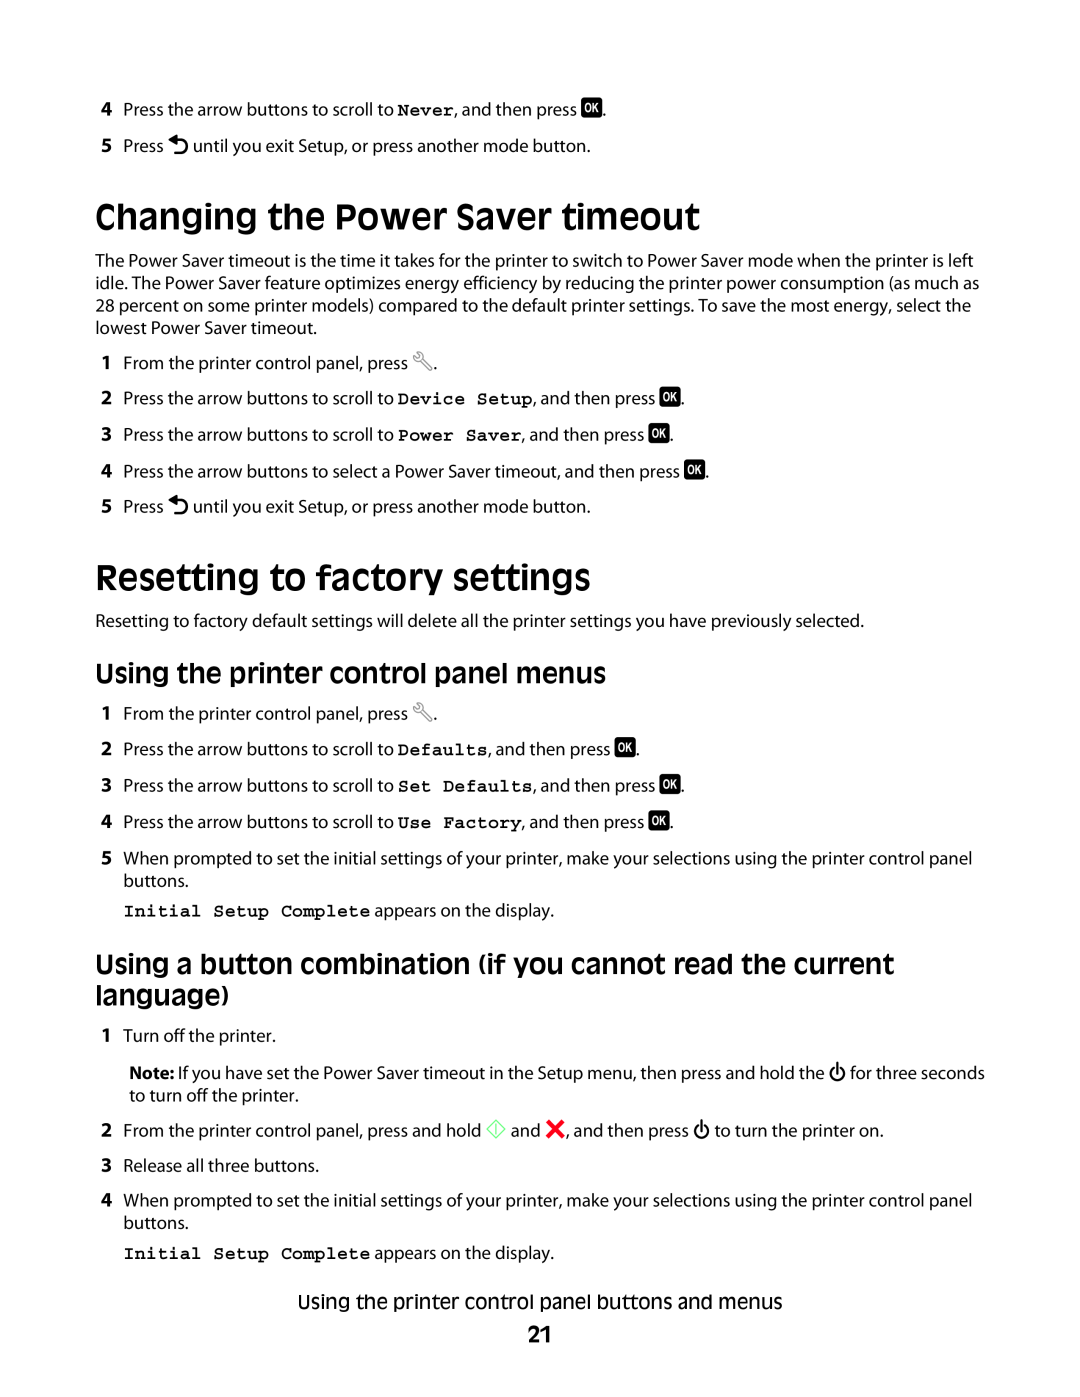 Dell V515W manual Changing the Power Saver timeout, Resetting to factory settings, Using the printer control panel menus 